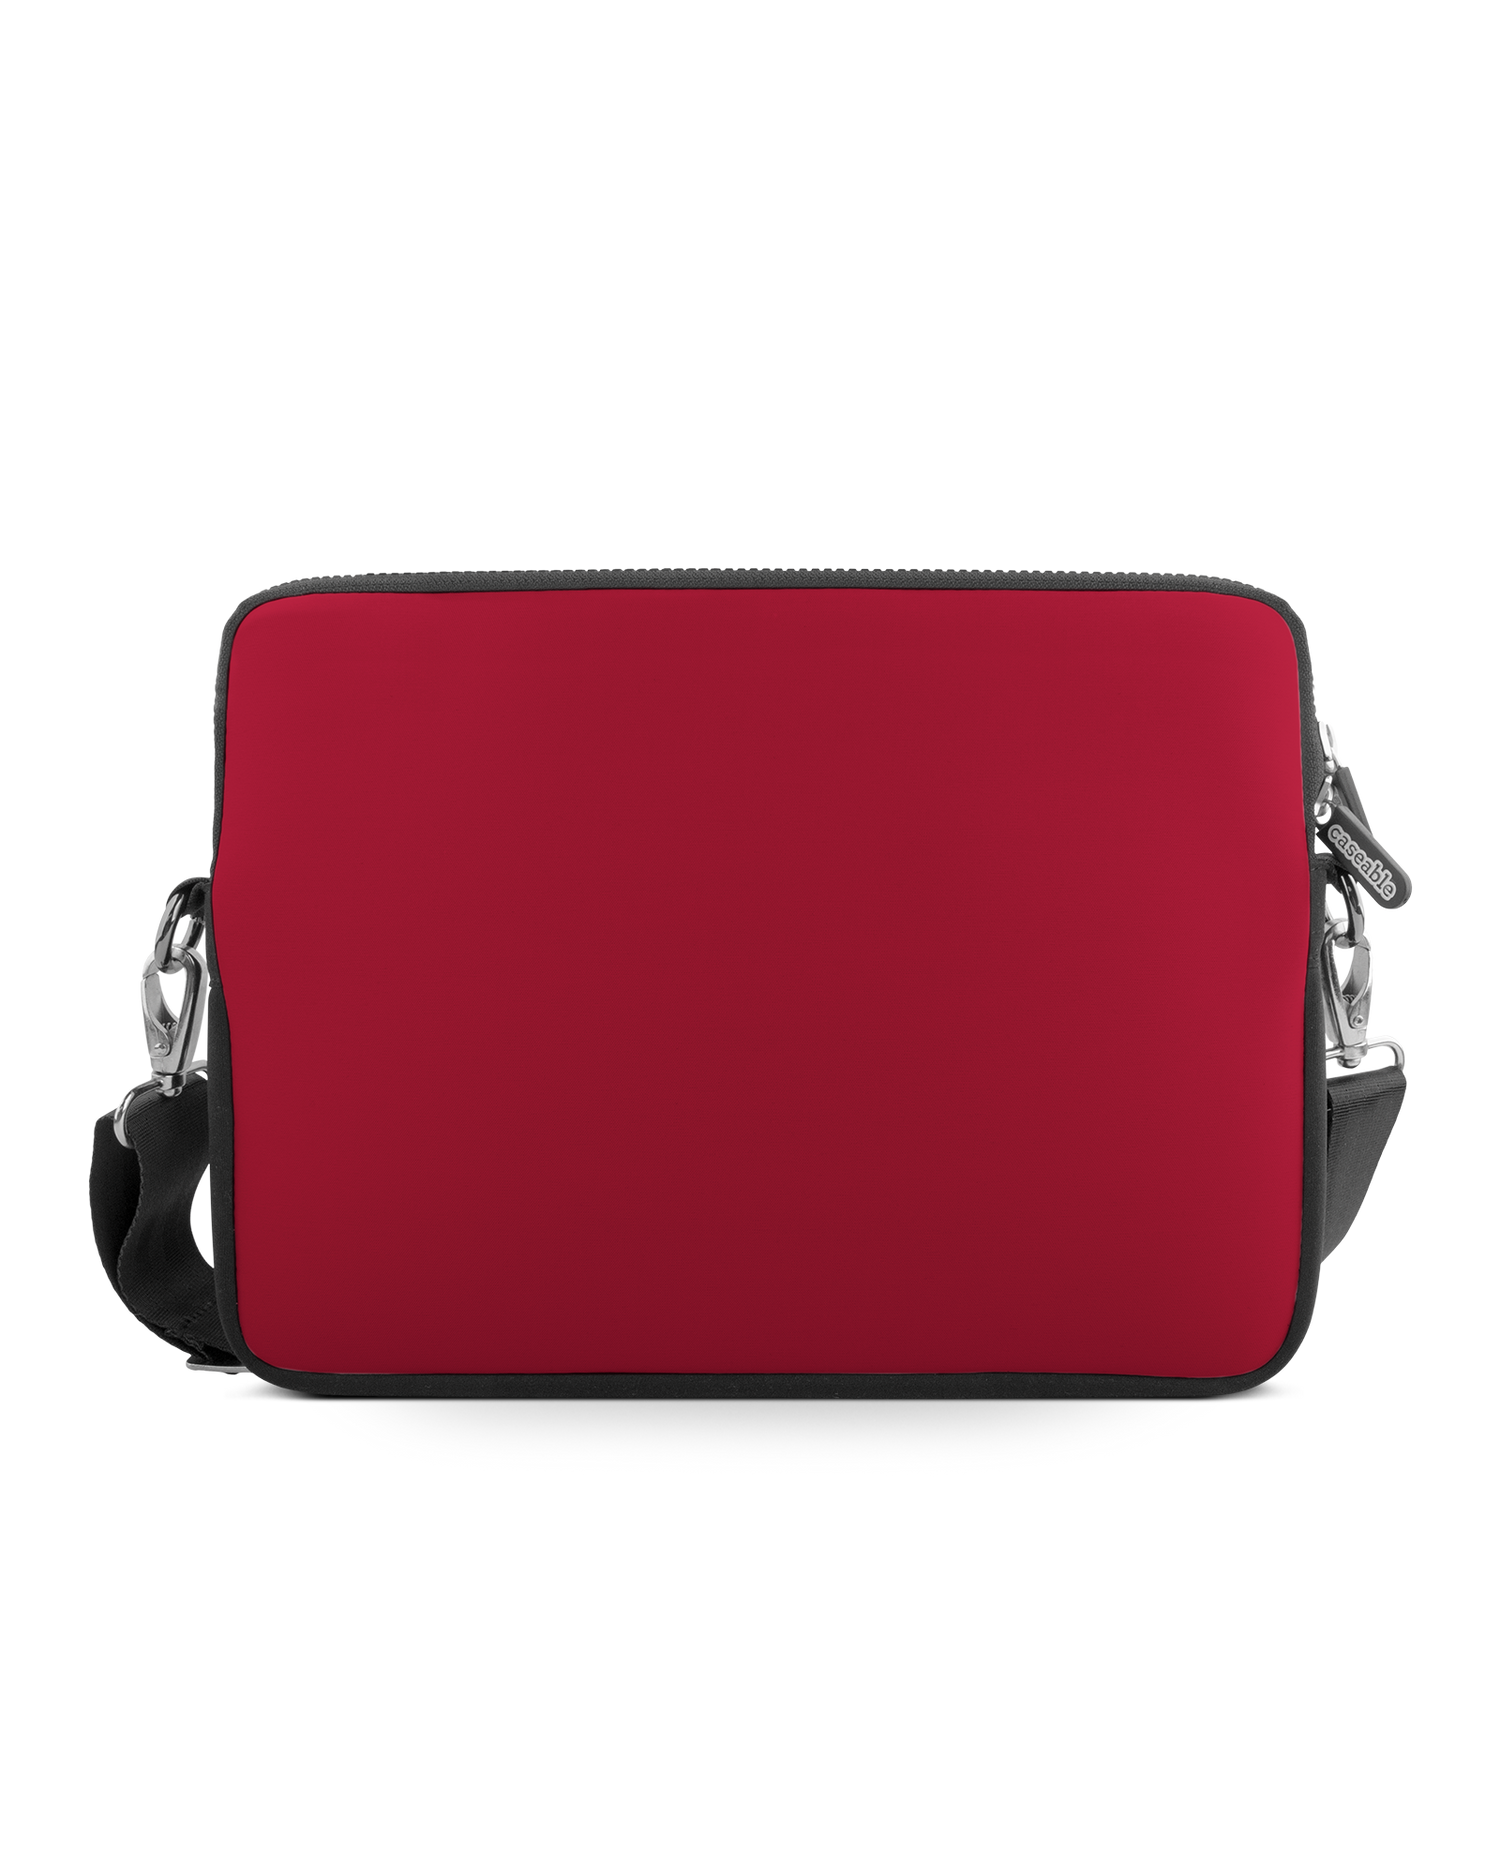 RED Premium Laptop Bag 17 inch: Front View